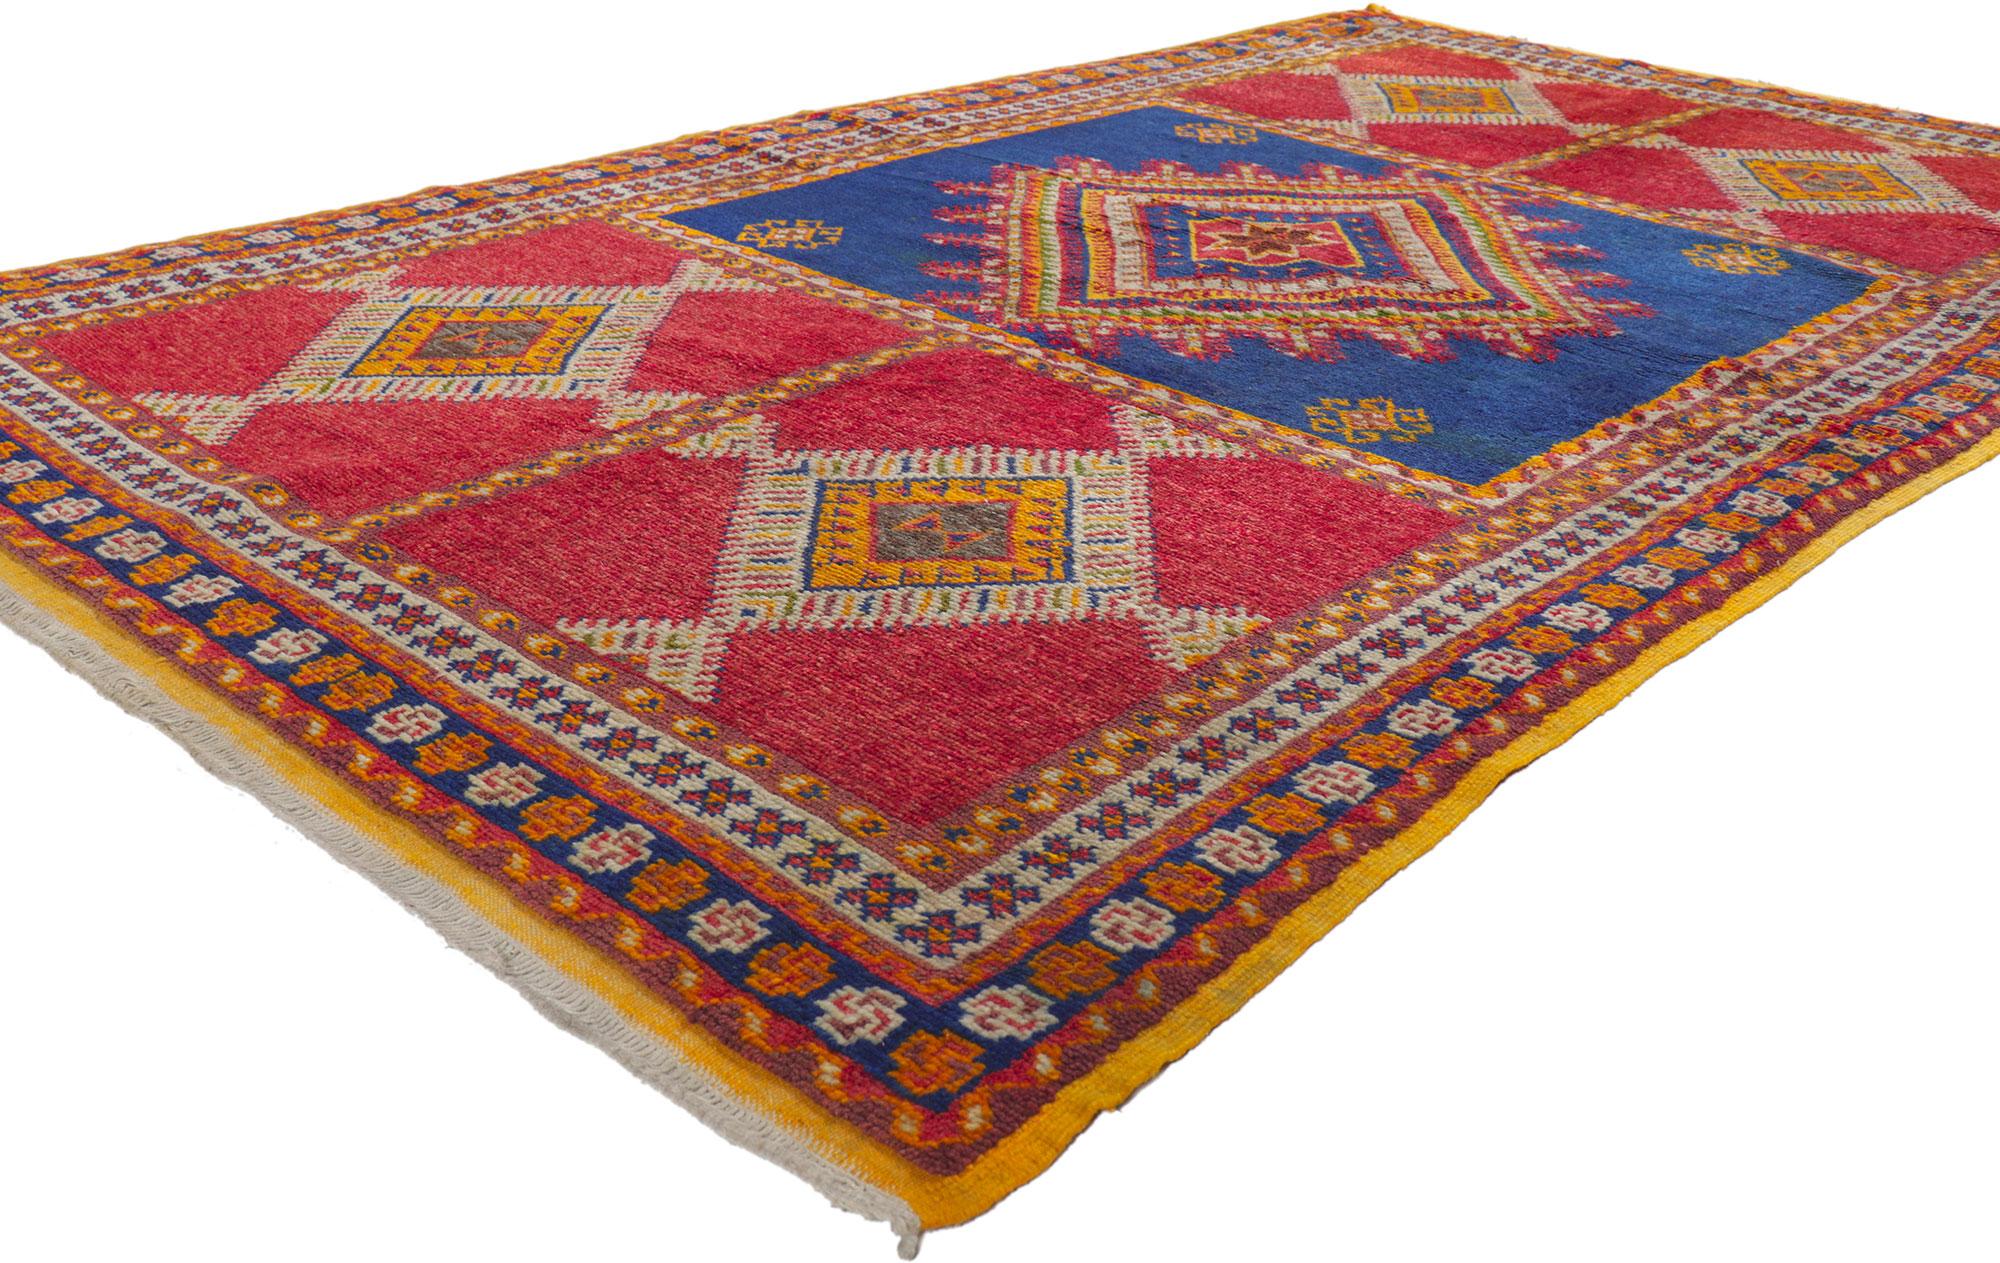 5 x 8 Vintage Berber Moroccan Rug 78095
Emanating nomadic charm with incredible detail and texture, this hand knotted woo vintage Berber Moroccan rug is a captivating vision of woven beauty. The striking tribal design and lively colorway woven into